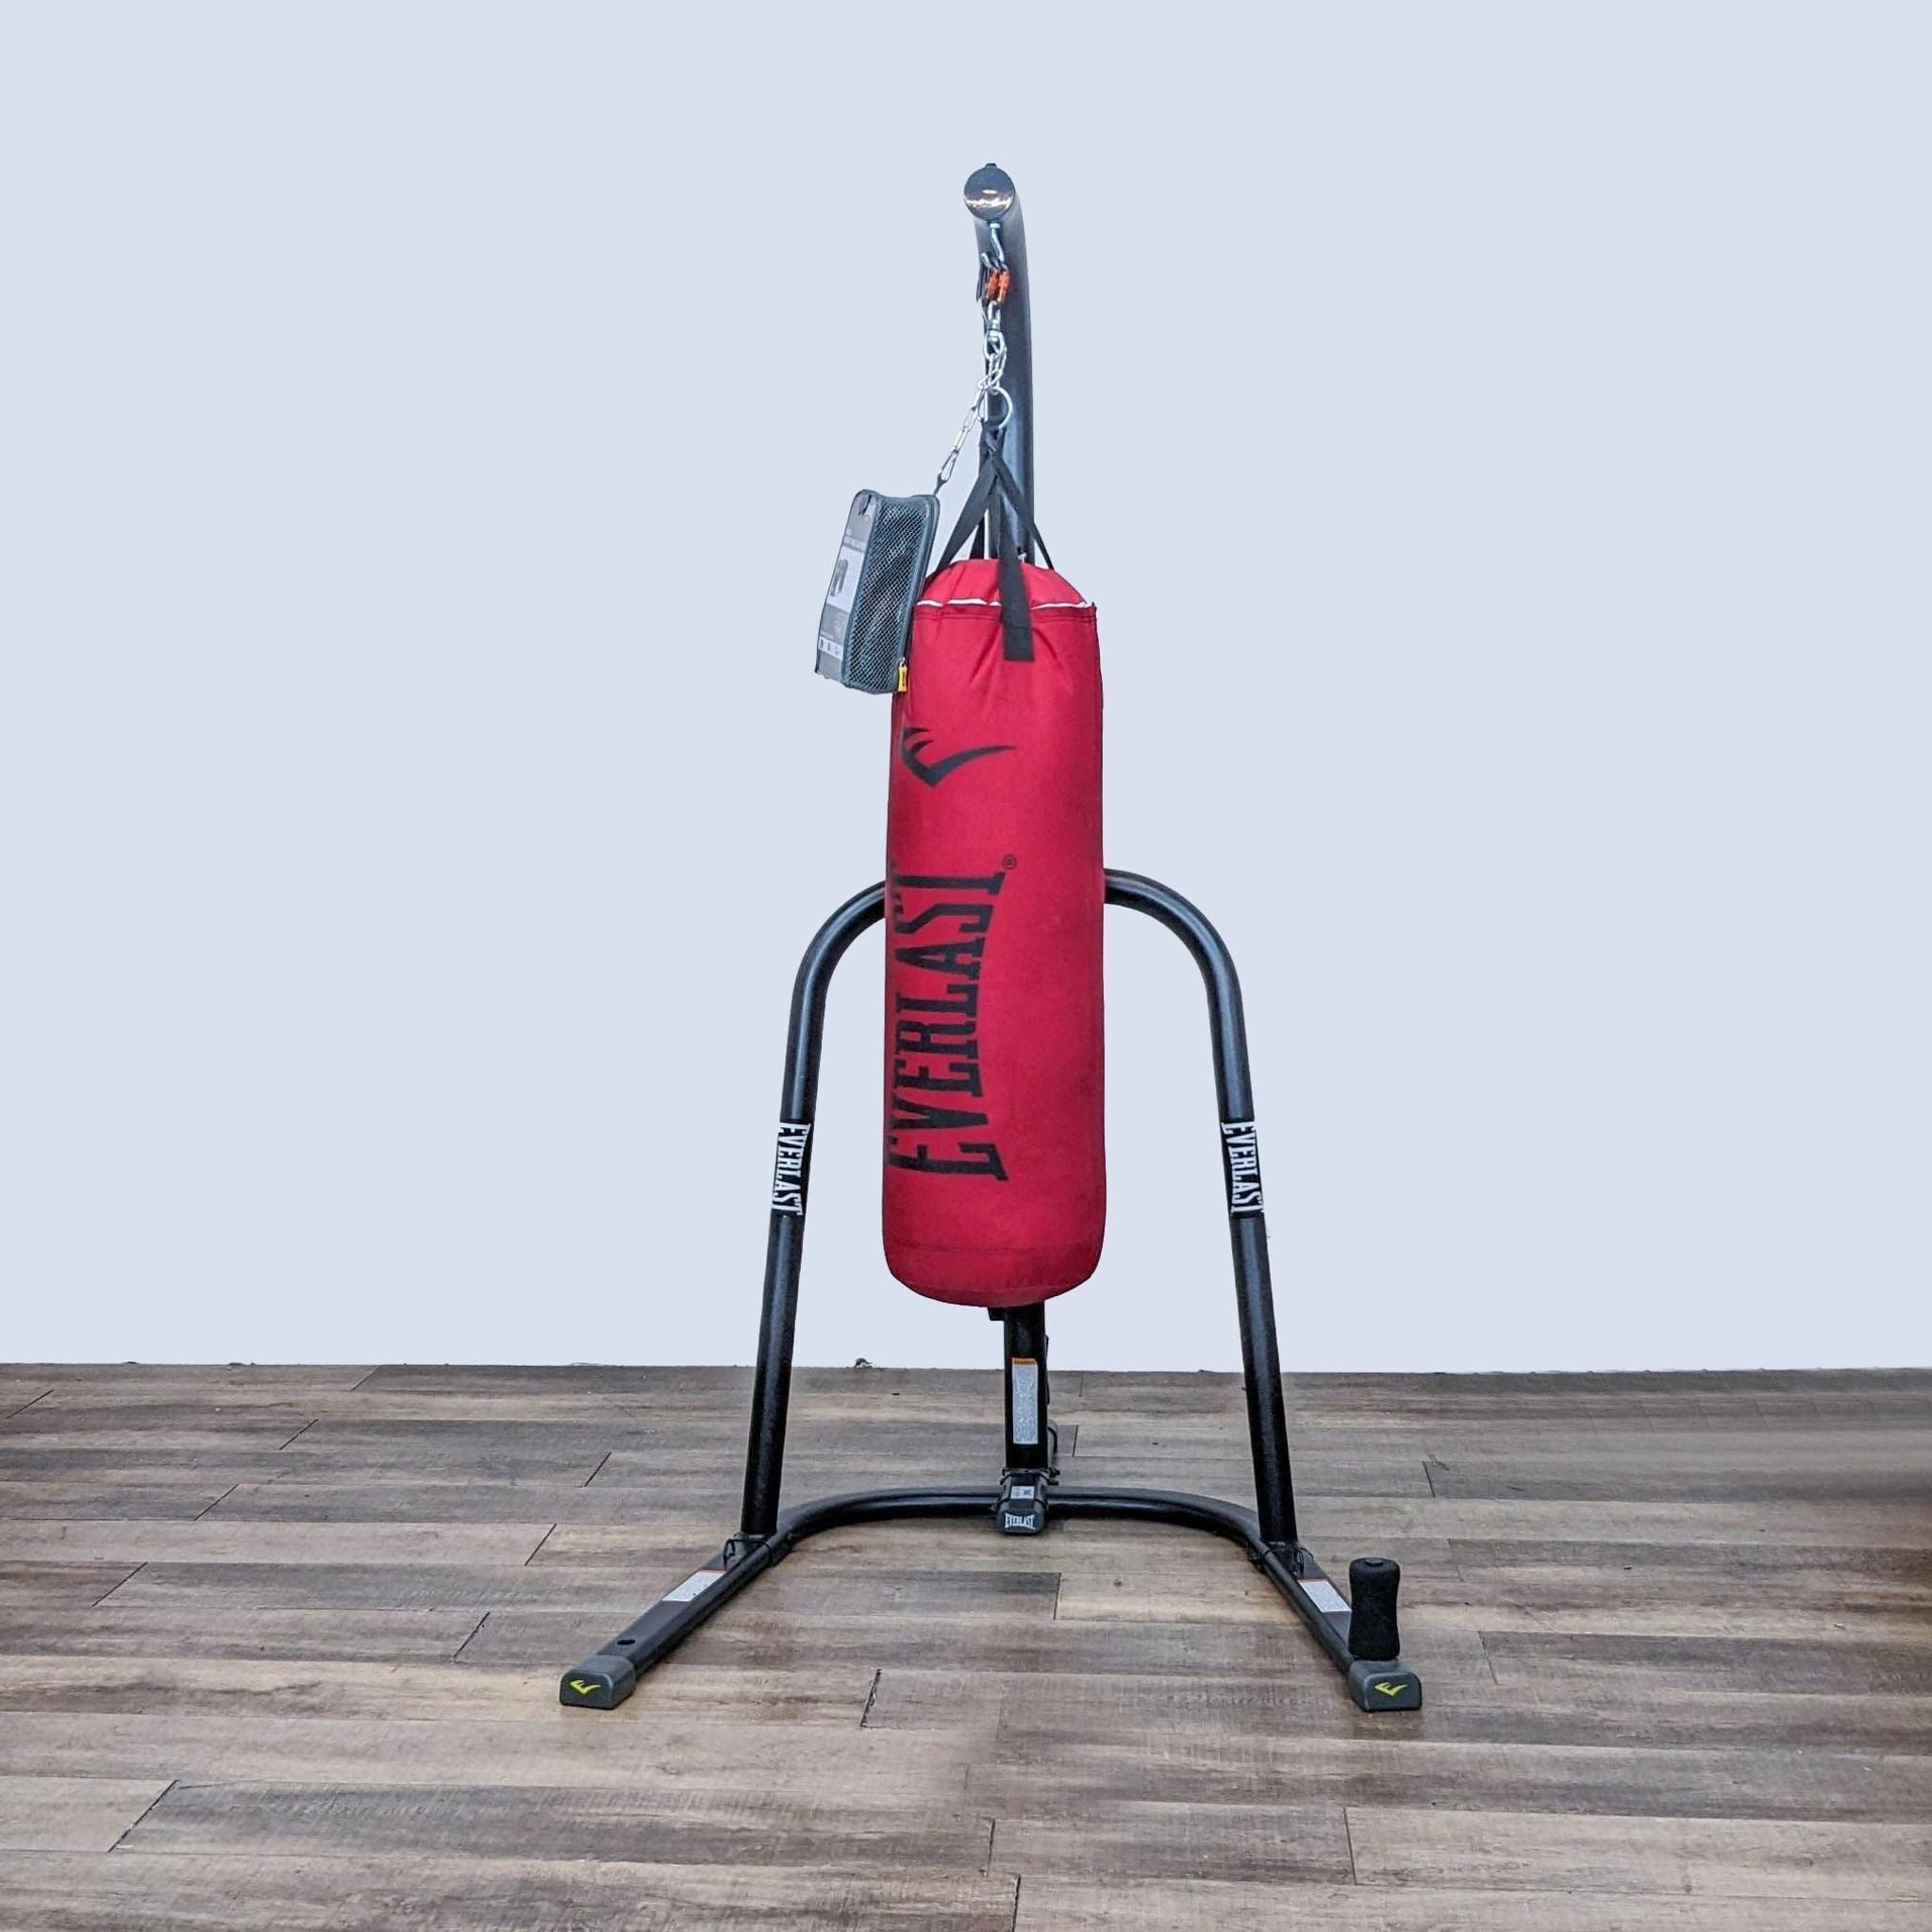 Everlast free-standing heavy bag for boxing and MMA with a solid frame and red durable punching bag, ideal for home or gym.